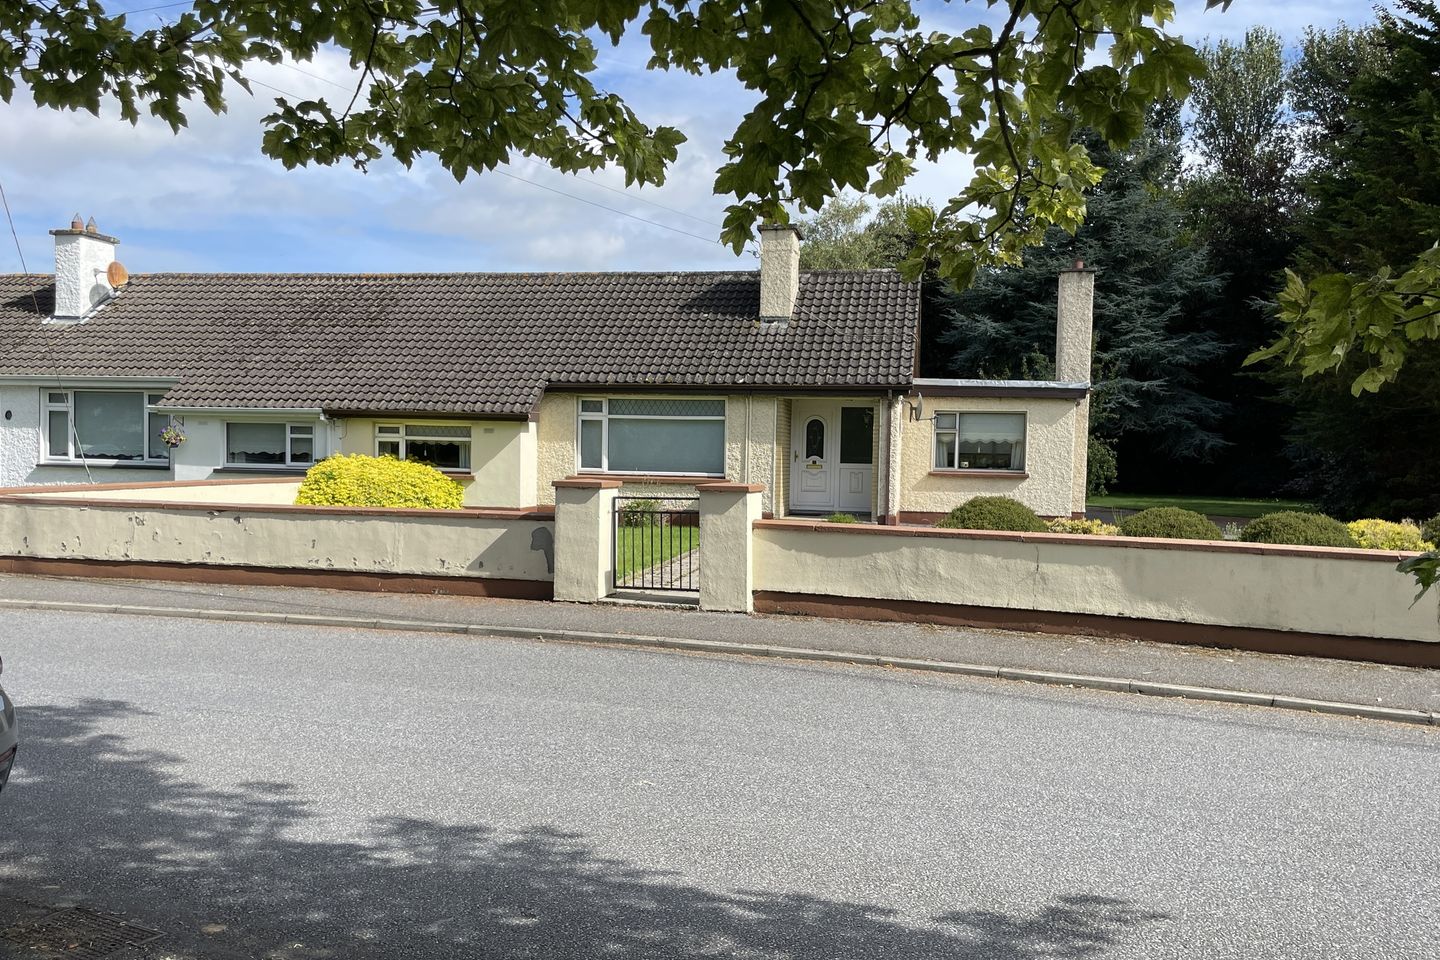 9 Talbot Terrace, Browneshill Road, Carlow Town, Co. Carlow, R93D9P7